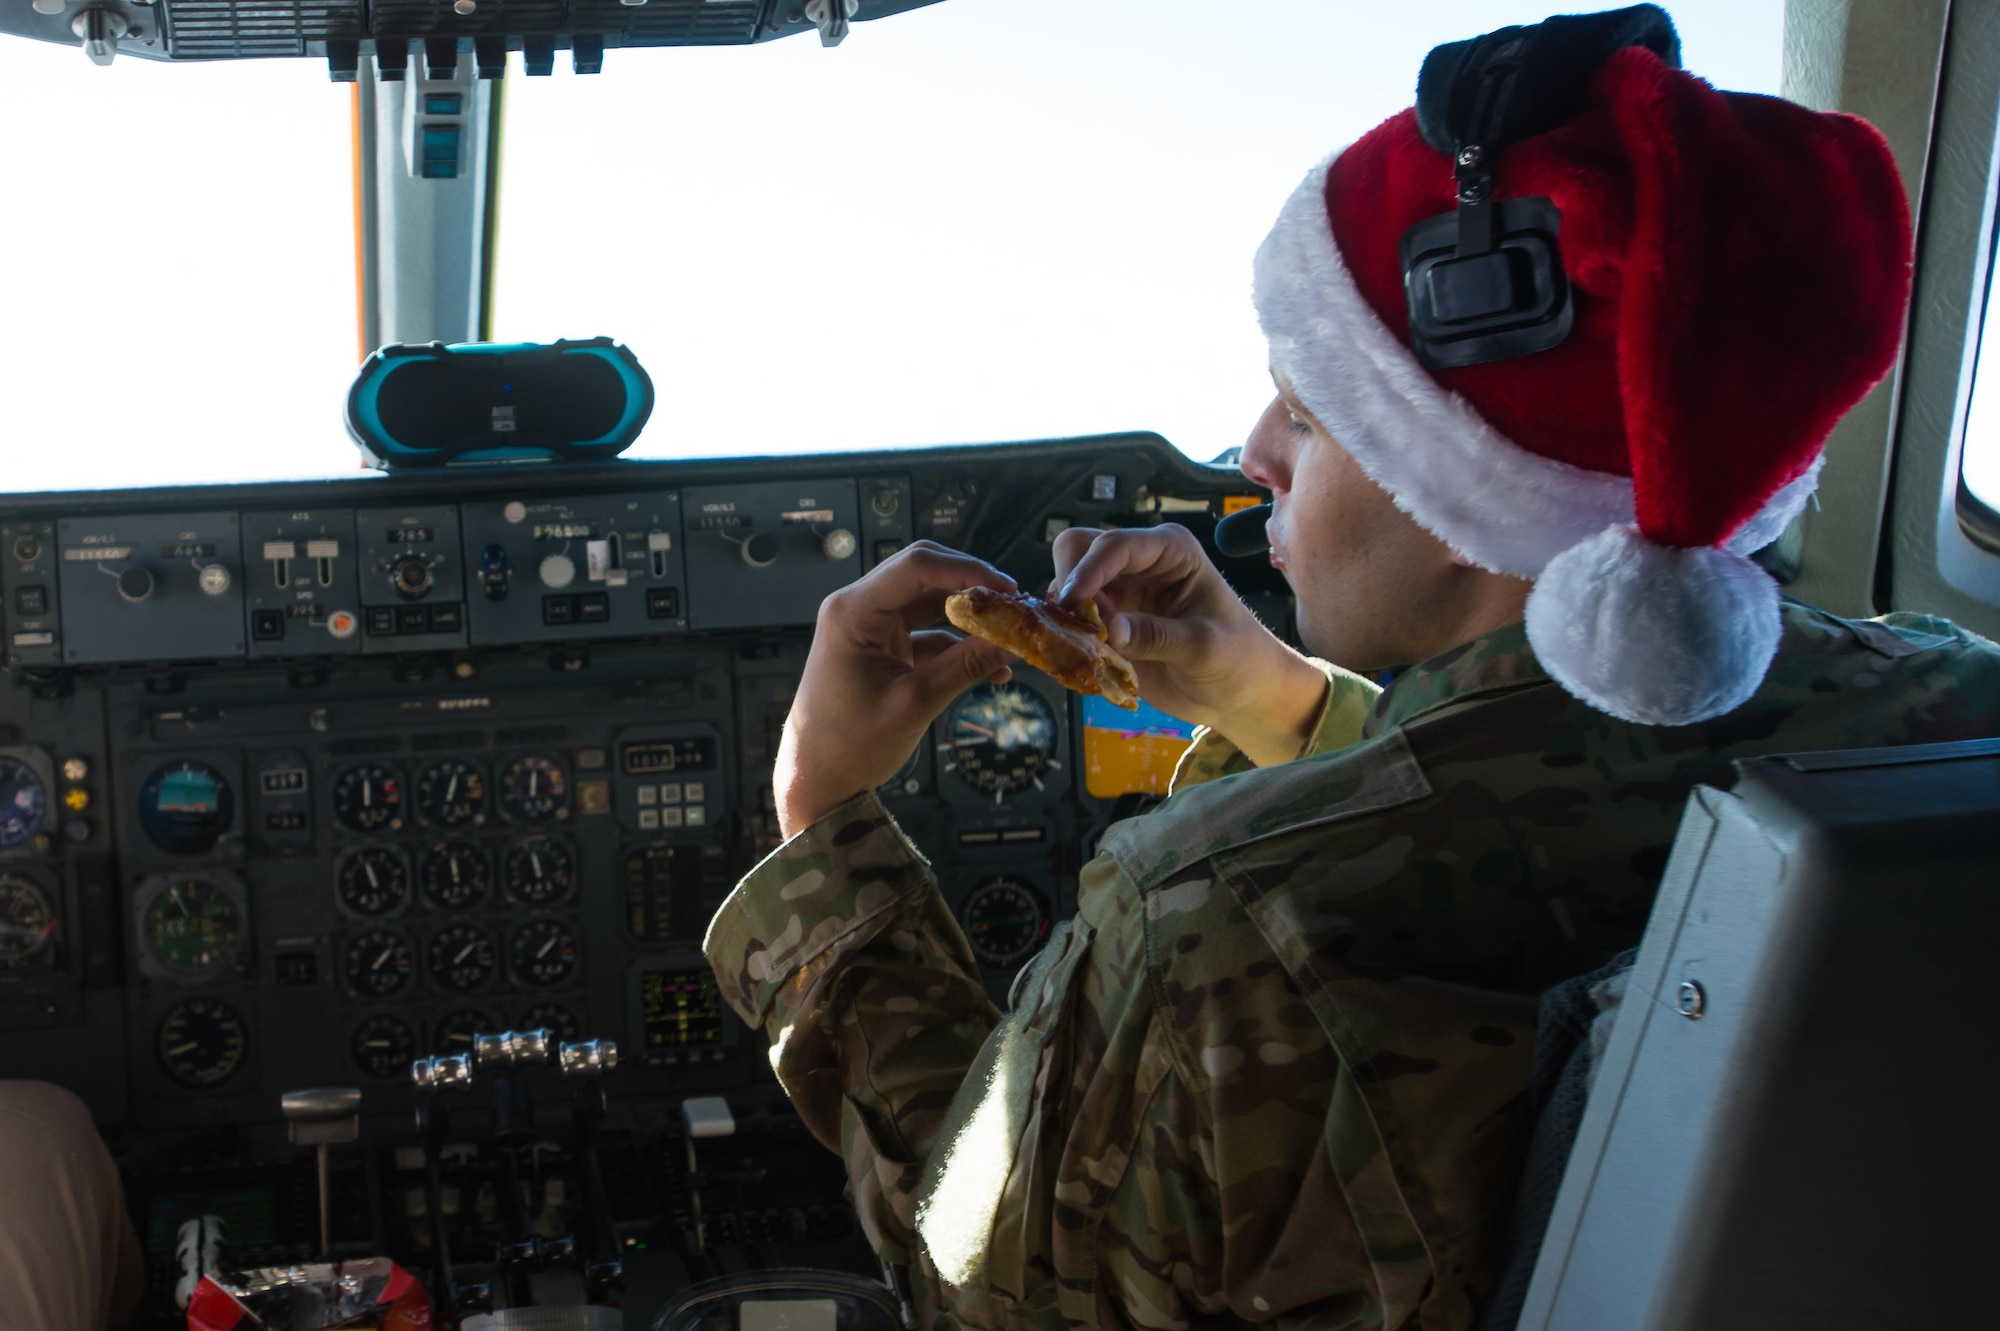 A 380th Air Expeditionary Wing KC-10 Extender pilot, 1st Lt. Andrew, eats reheated pizza during a sortie in support of Combined Joint Task Force-Operation Inherent Resolve over Iraq, Dec. 25, 2016. Crew members used two small ovens to prepare their holiday meal. (U.S. Air Force photo/Senior Airman Tyler Woodward)